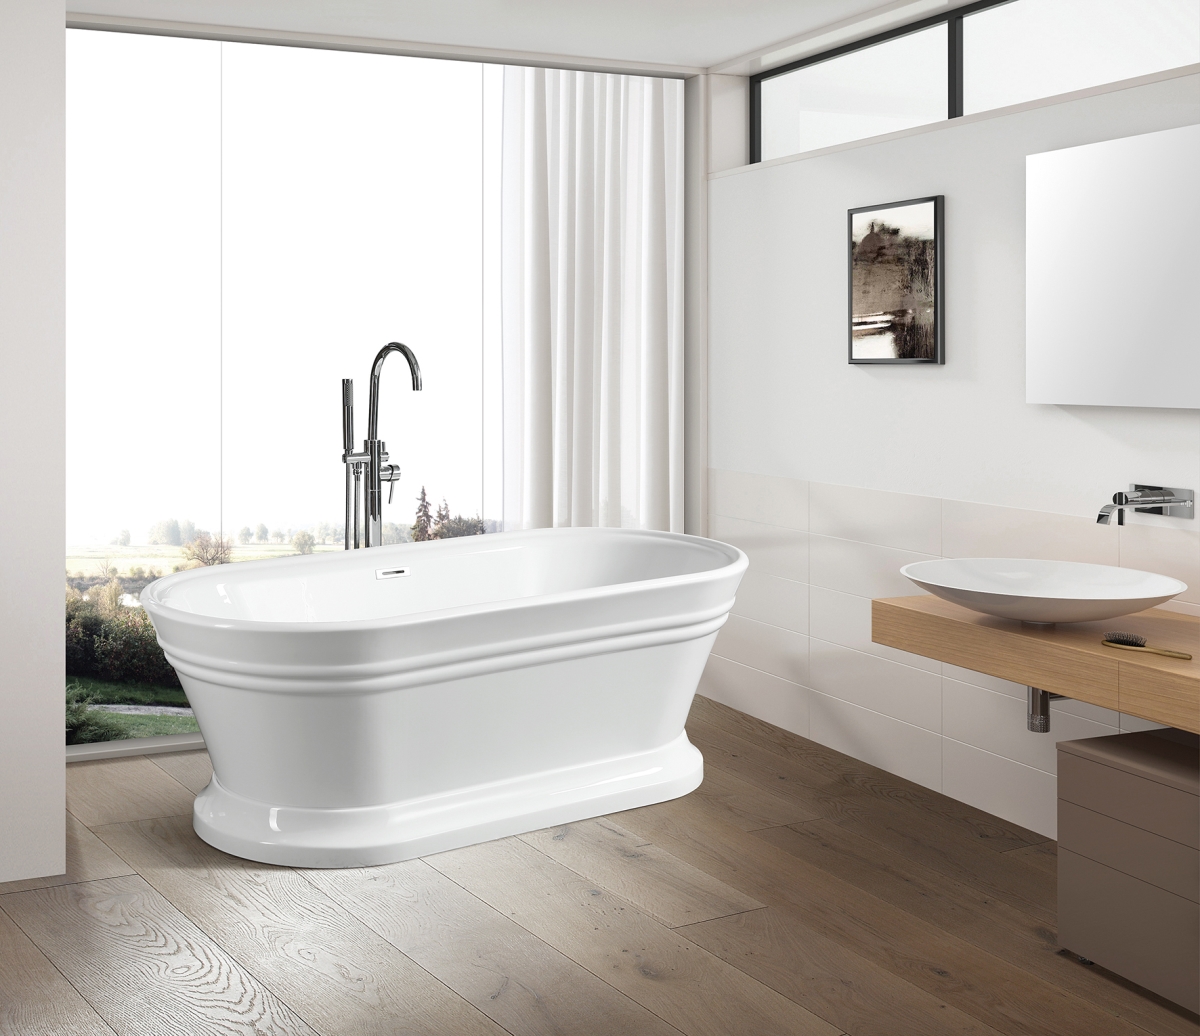 Va6610-l Freestanding White Acrylic Bathtub With Polished Chrome Slotted Overflow & Pop-up Drain - 67 X 31 X 23.5 In.